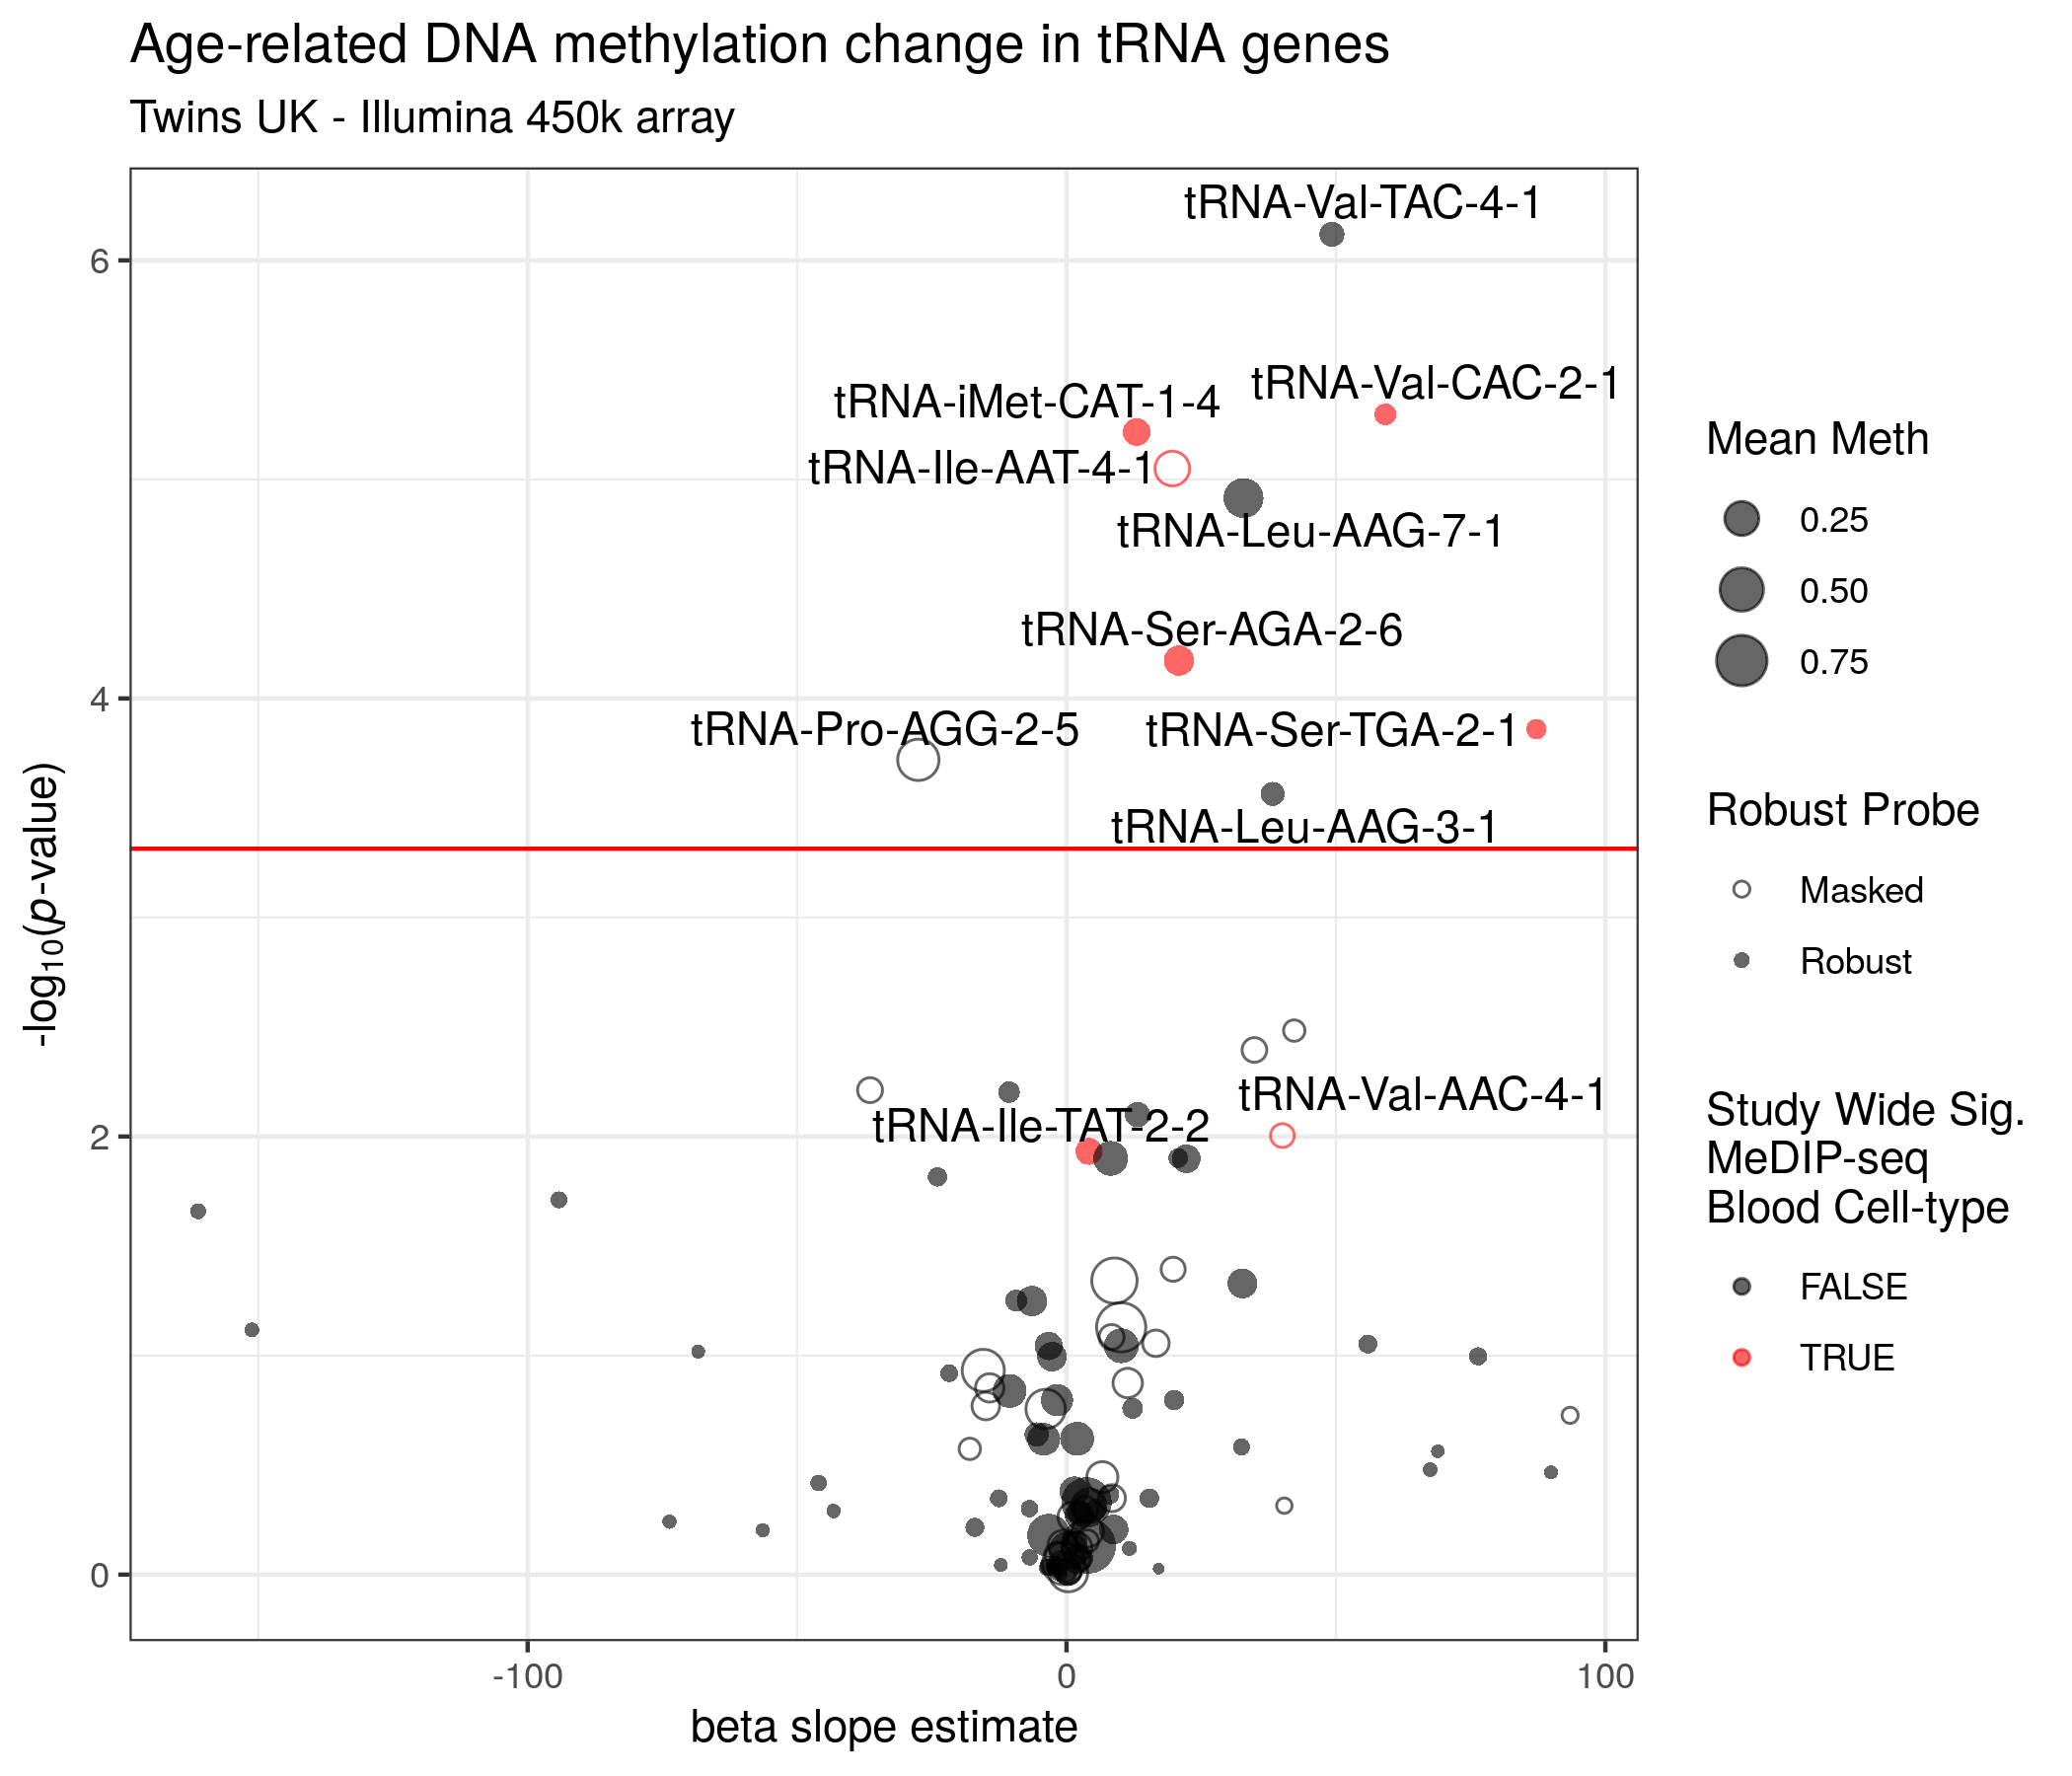 Volcano-like plot. tRNAs are labelled if they are significant here or were in the MeDIP-seq data (Red). Model slope: the model coefficient for the methylation values. Unfilled circles indicate those probes in the general mask generated by Zhou et al. [223]. Significance threshold: \(0.05/103 \approx 4.58\times10^{-4}\) (the number of tRNA genes examined).